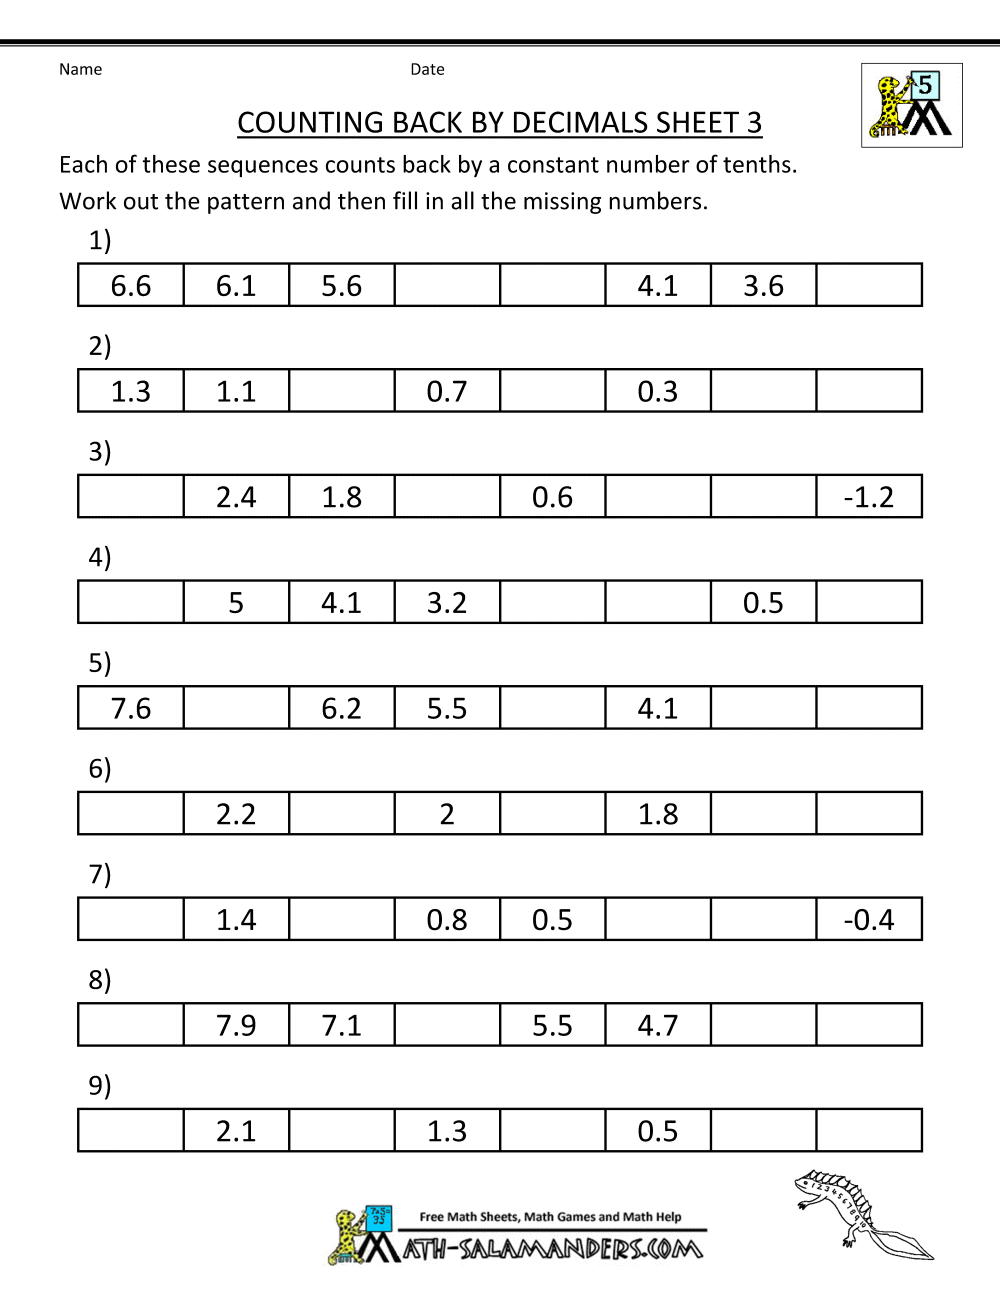 3 Sheet Counting  Answers Sheet worksheets 3 by decimals back sequences missing number